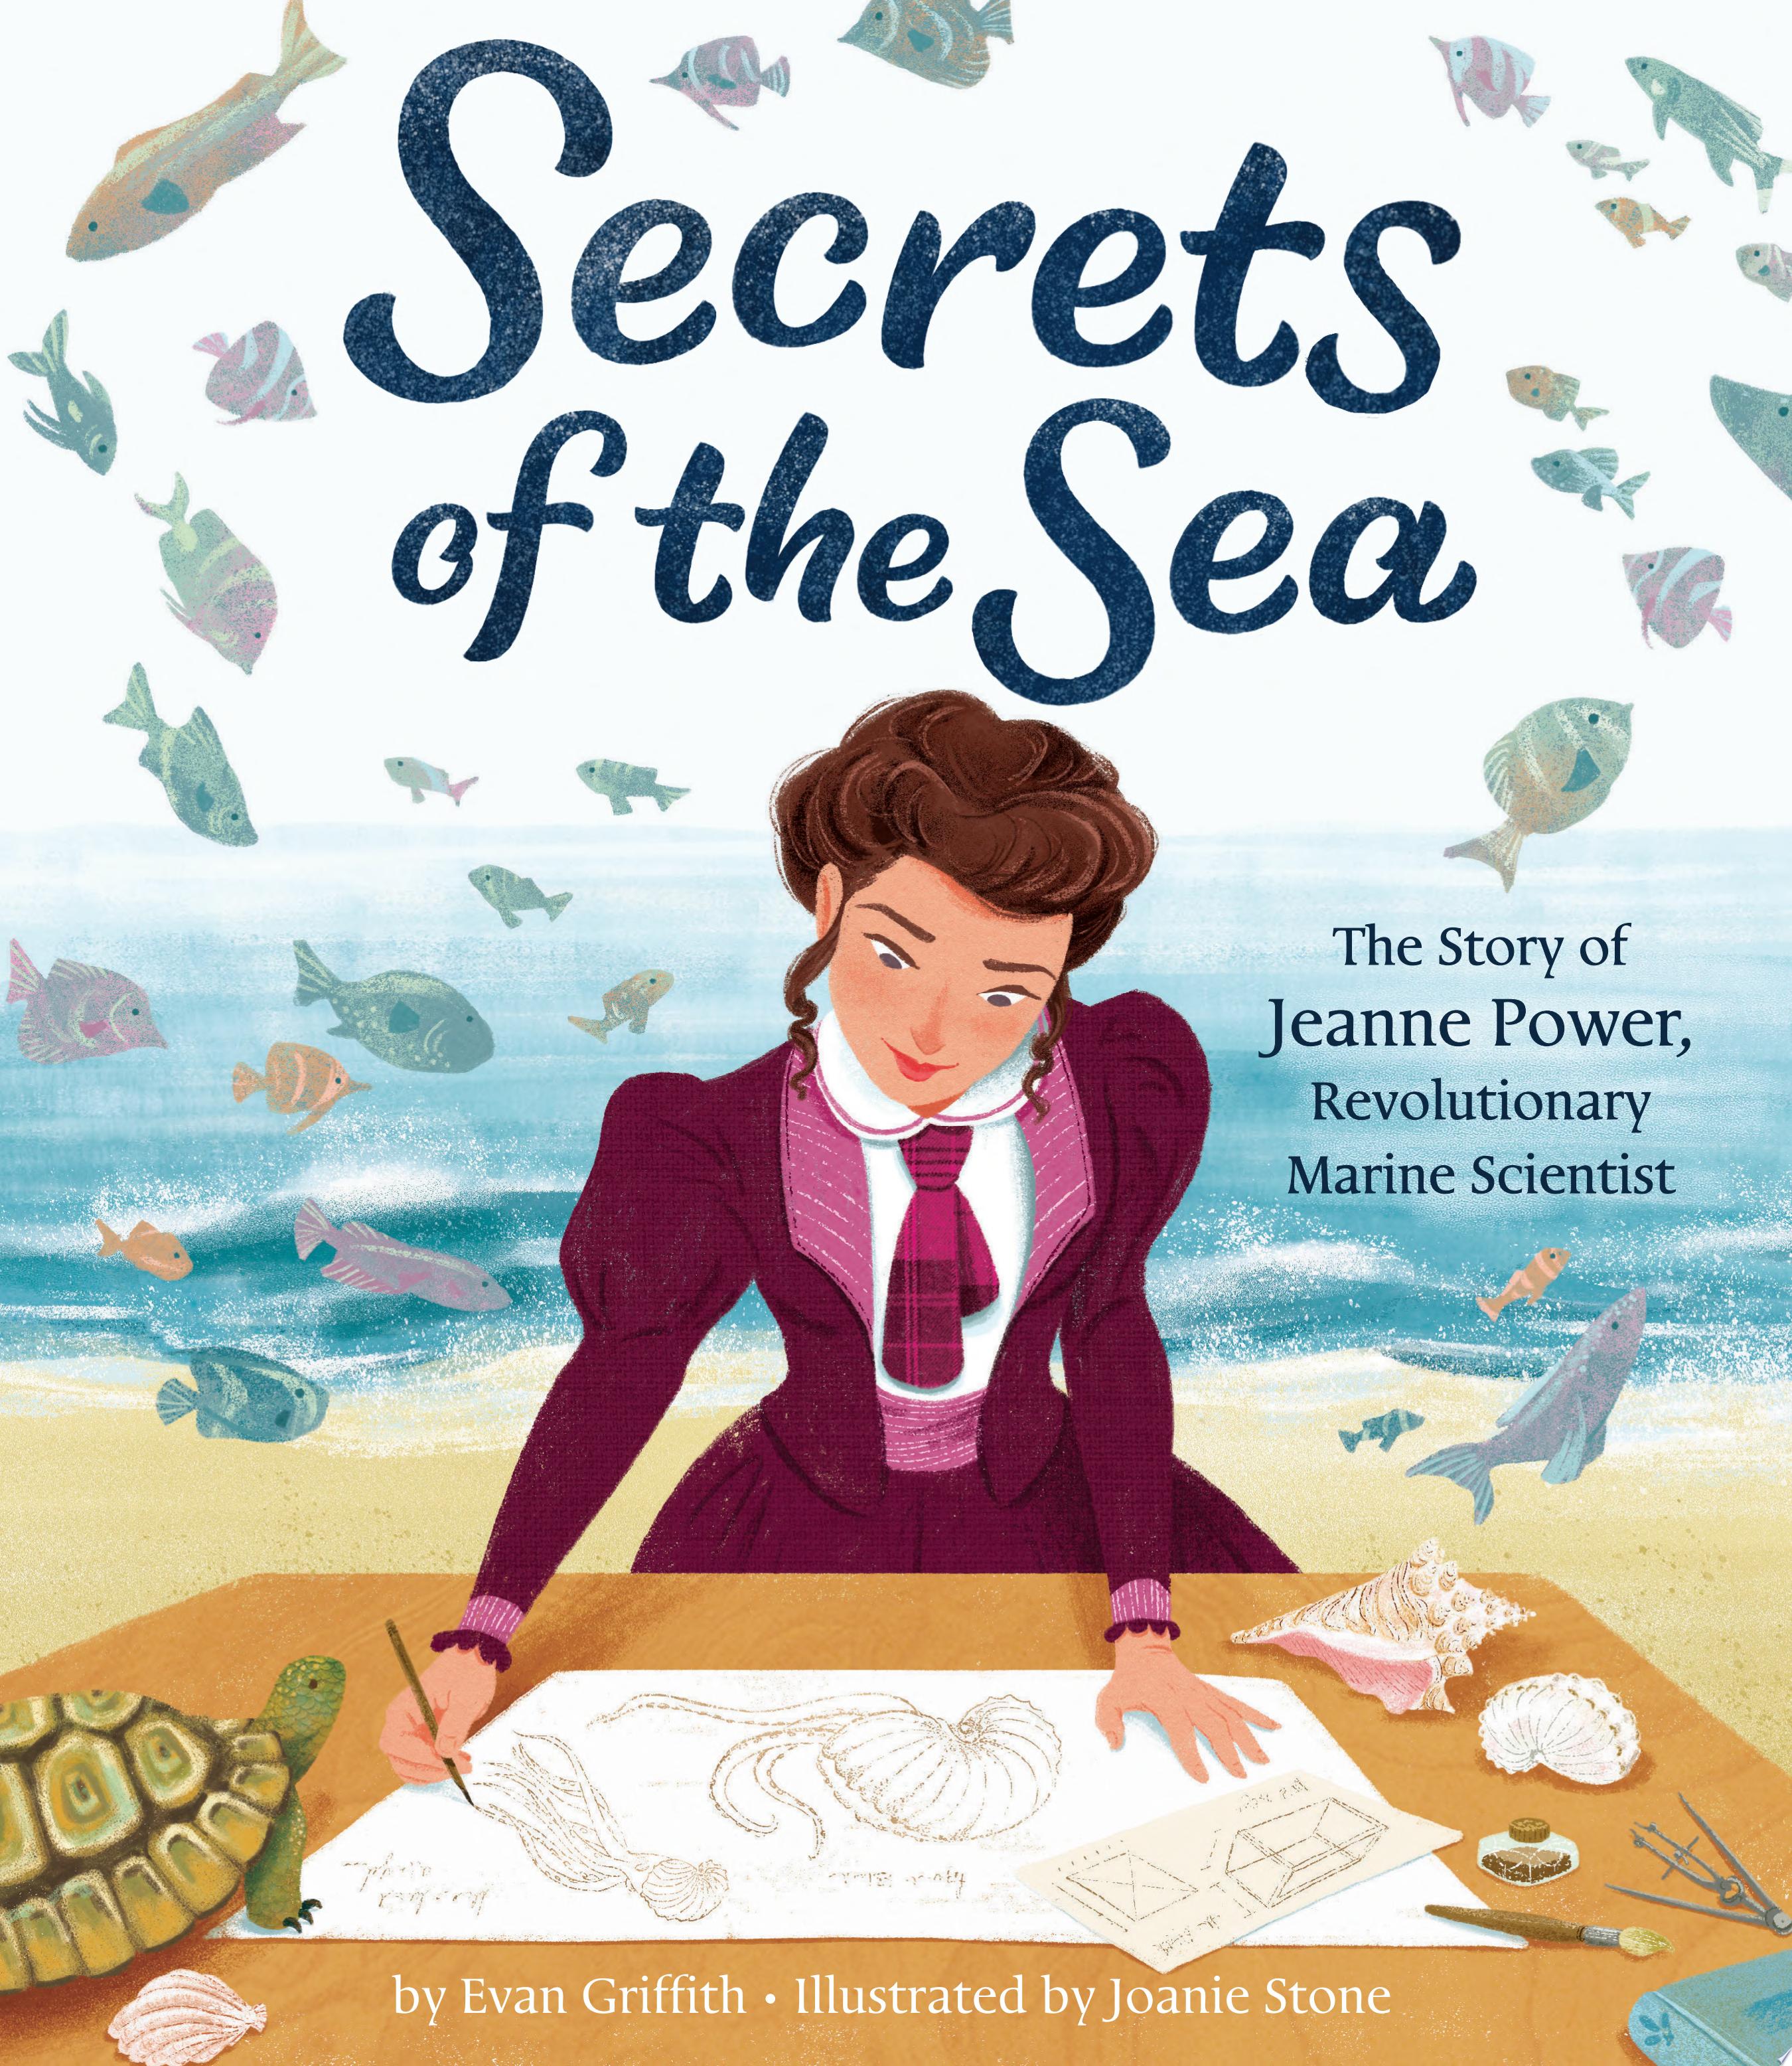 Image for "Secrets of the Sea"